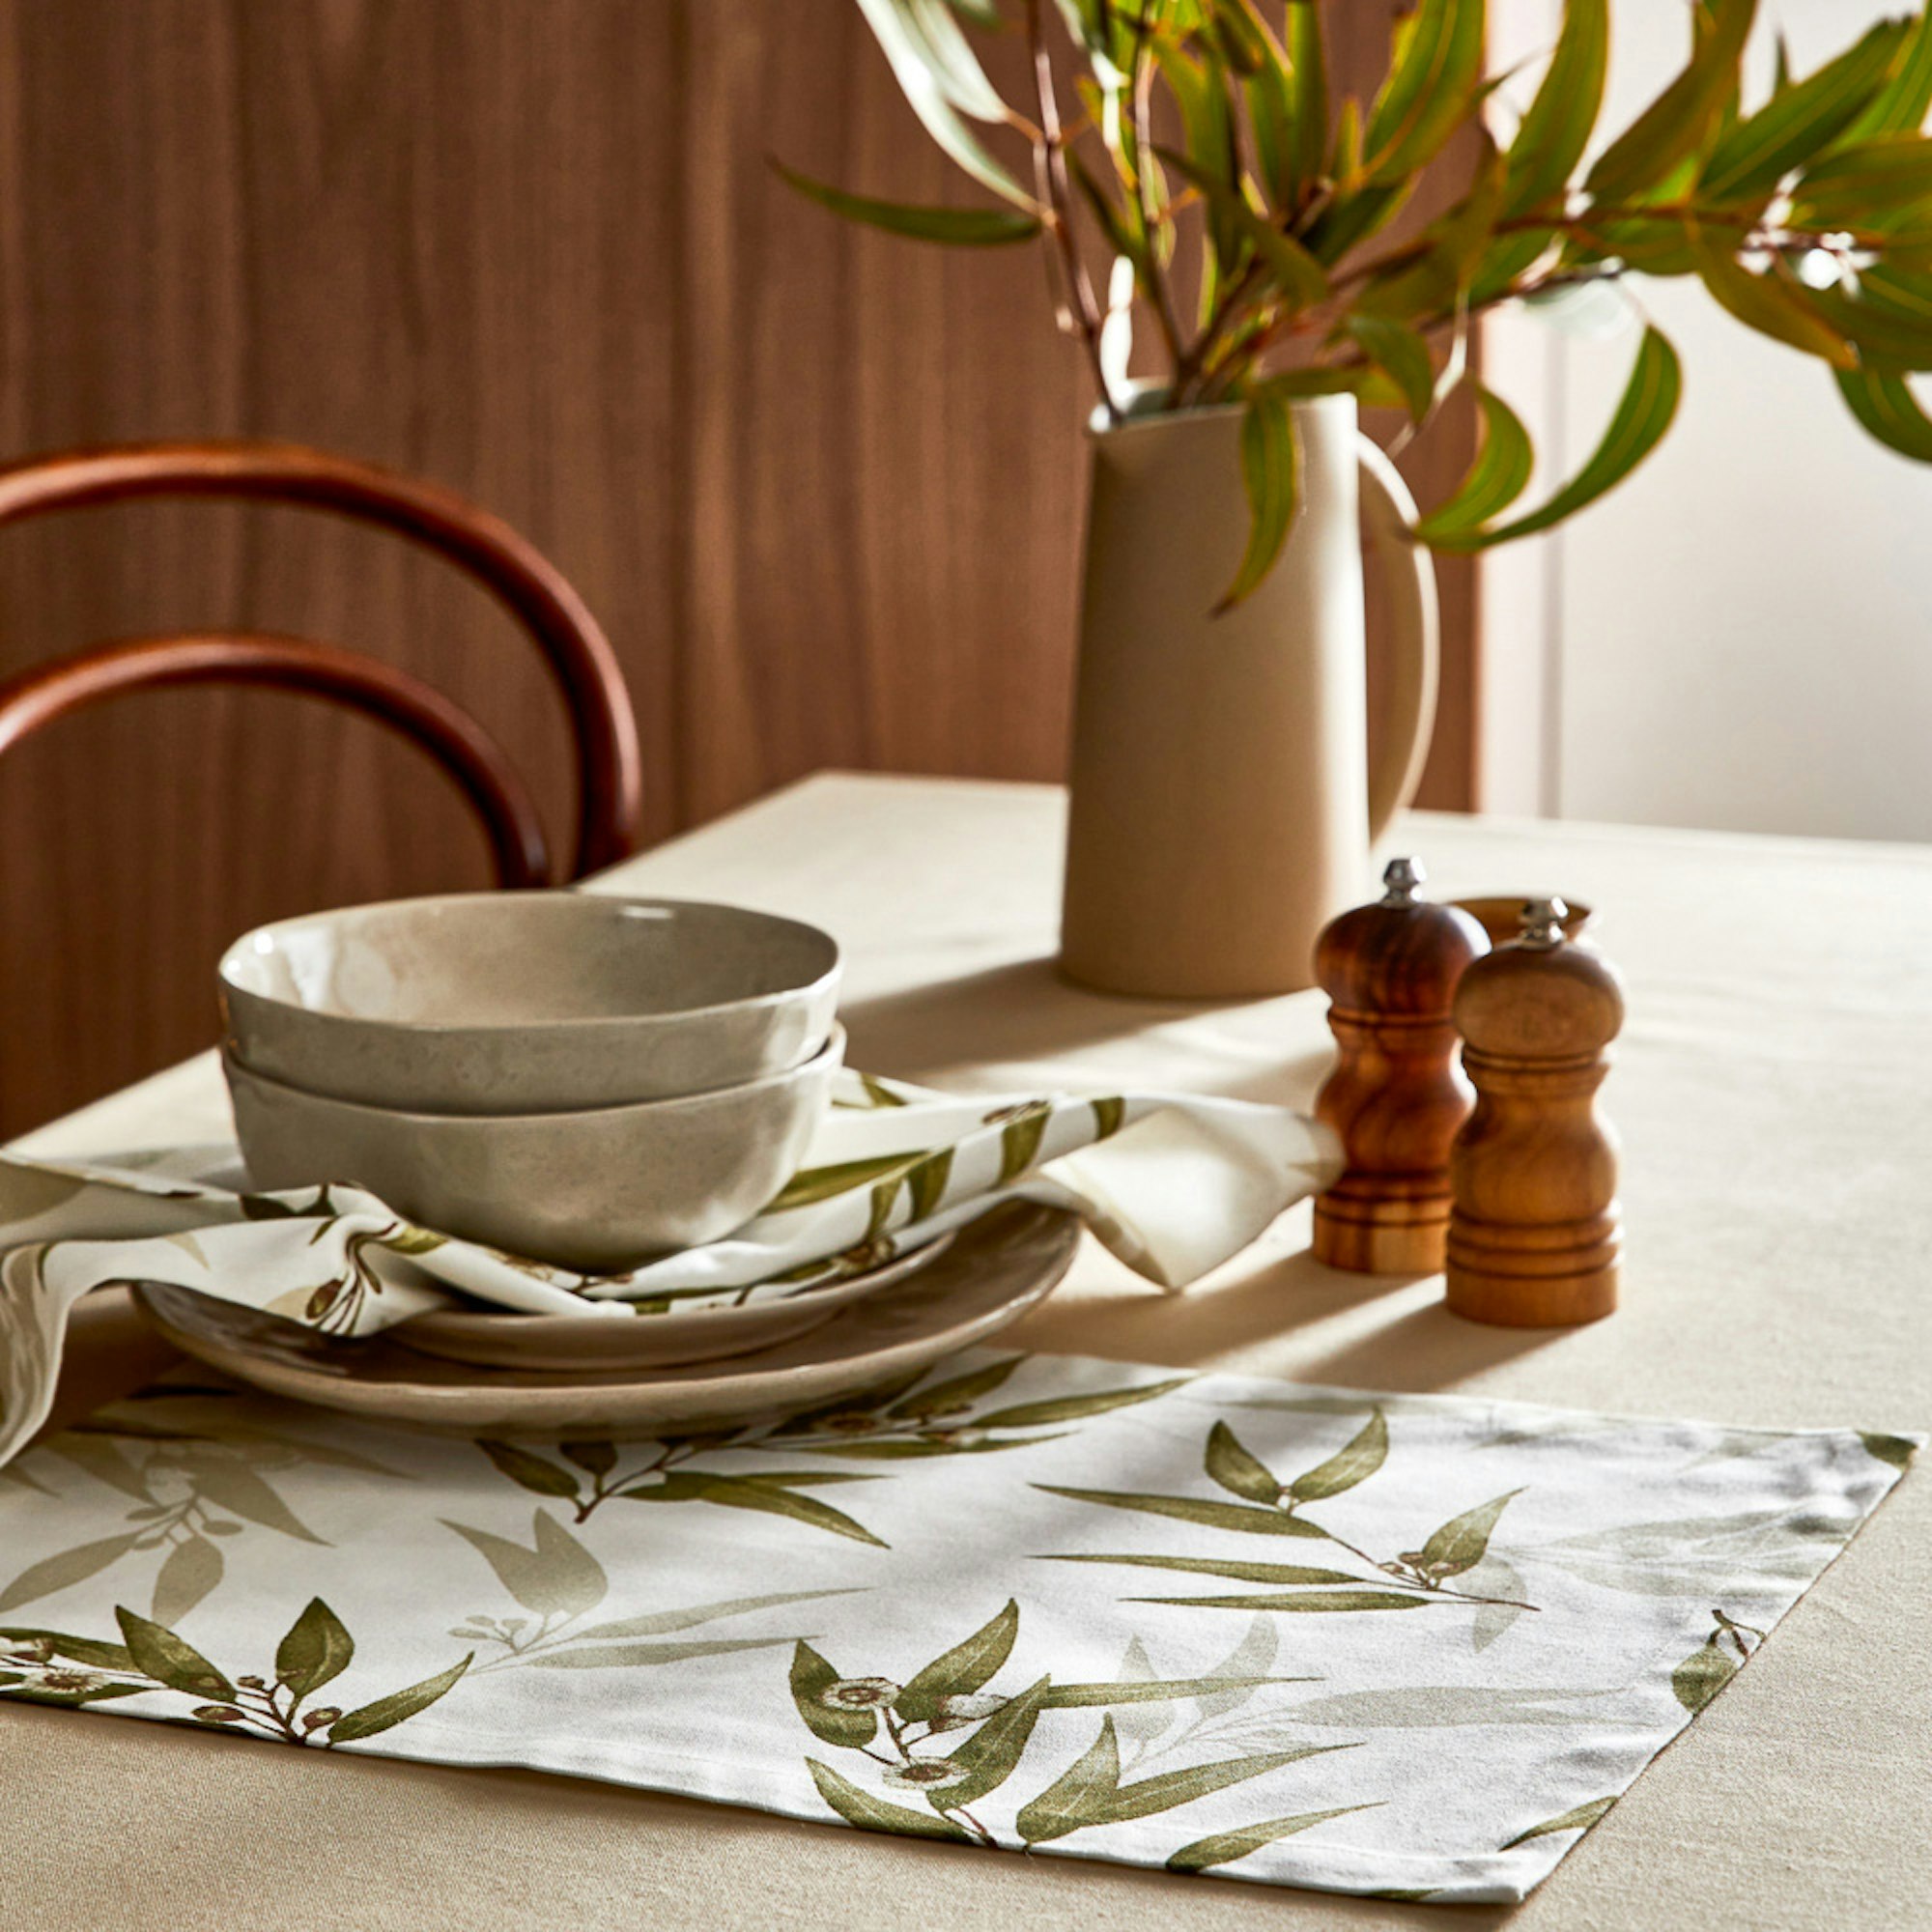 MyHouse SS23 collection. Gum leaf placemats on table setting with bowls and plates stacked and a jug of natives.